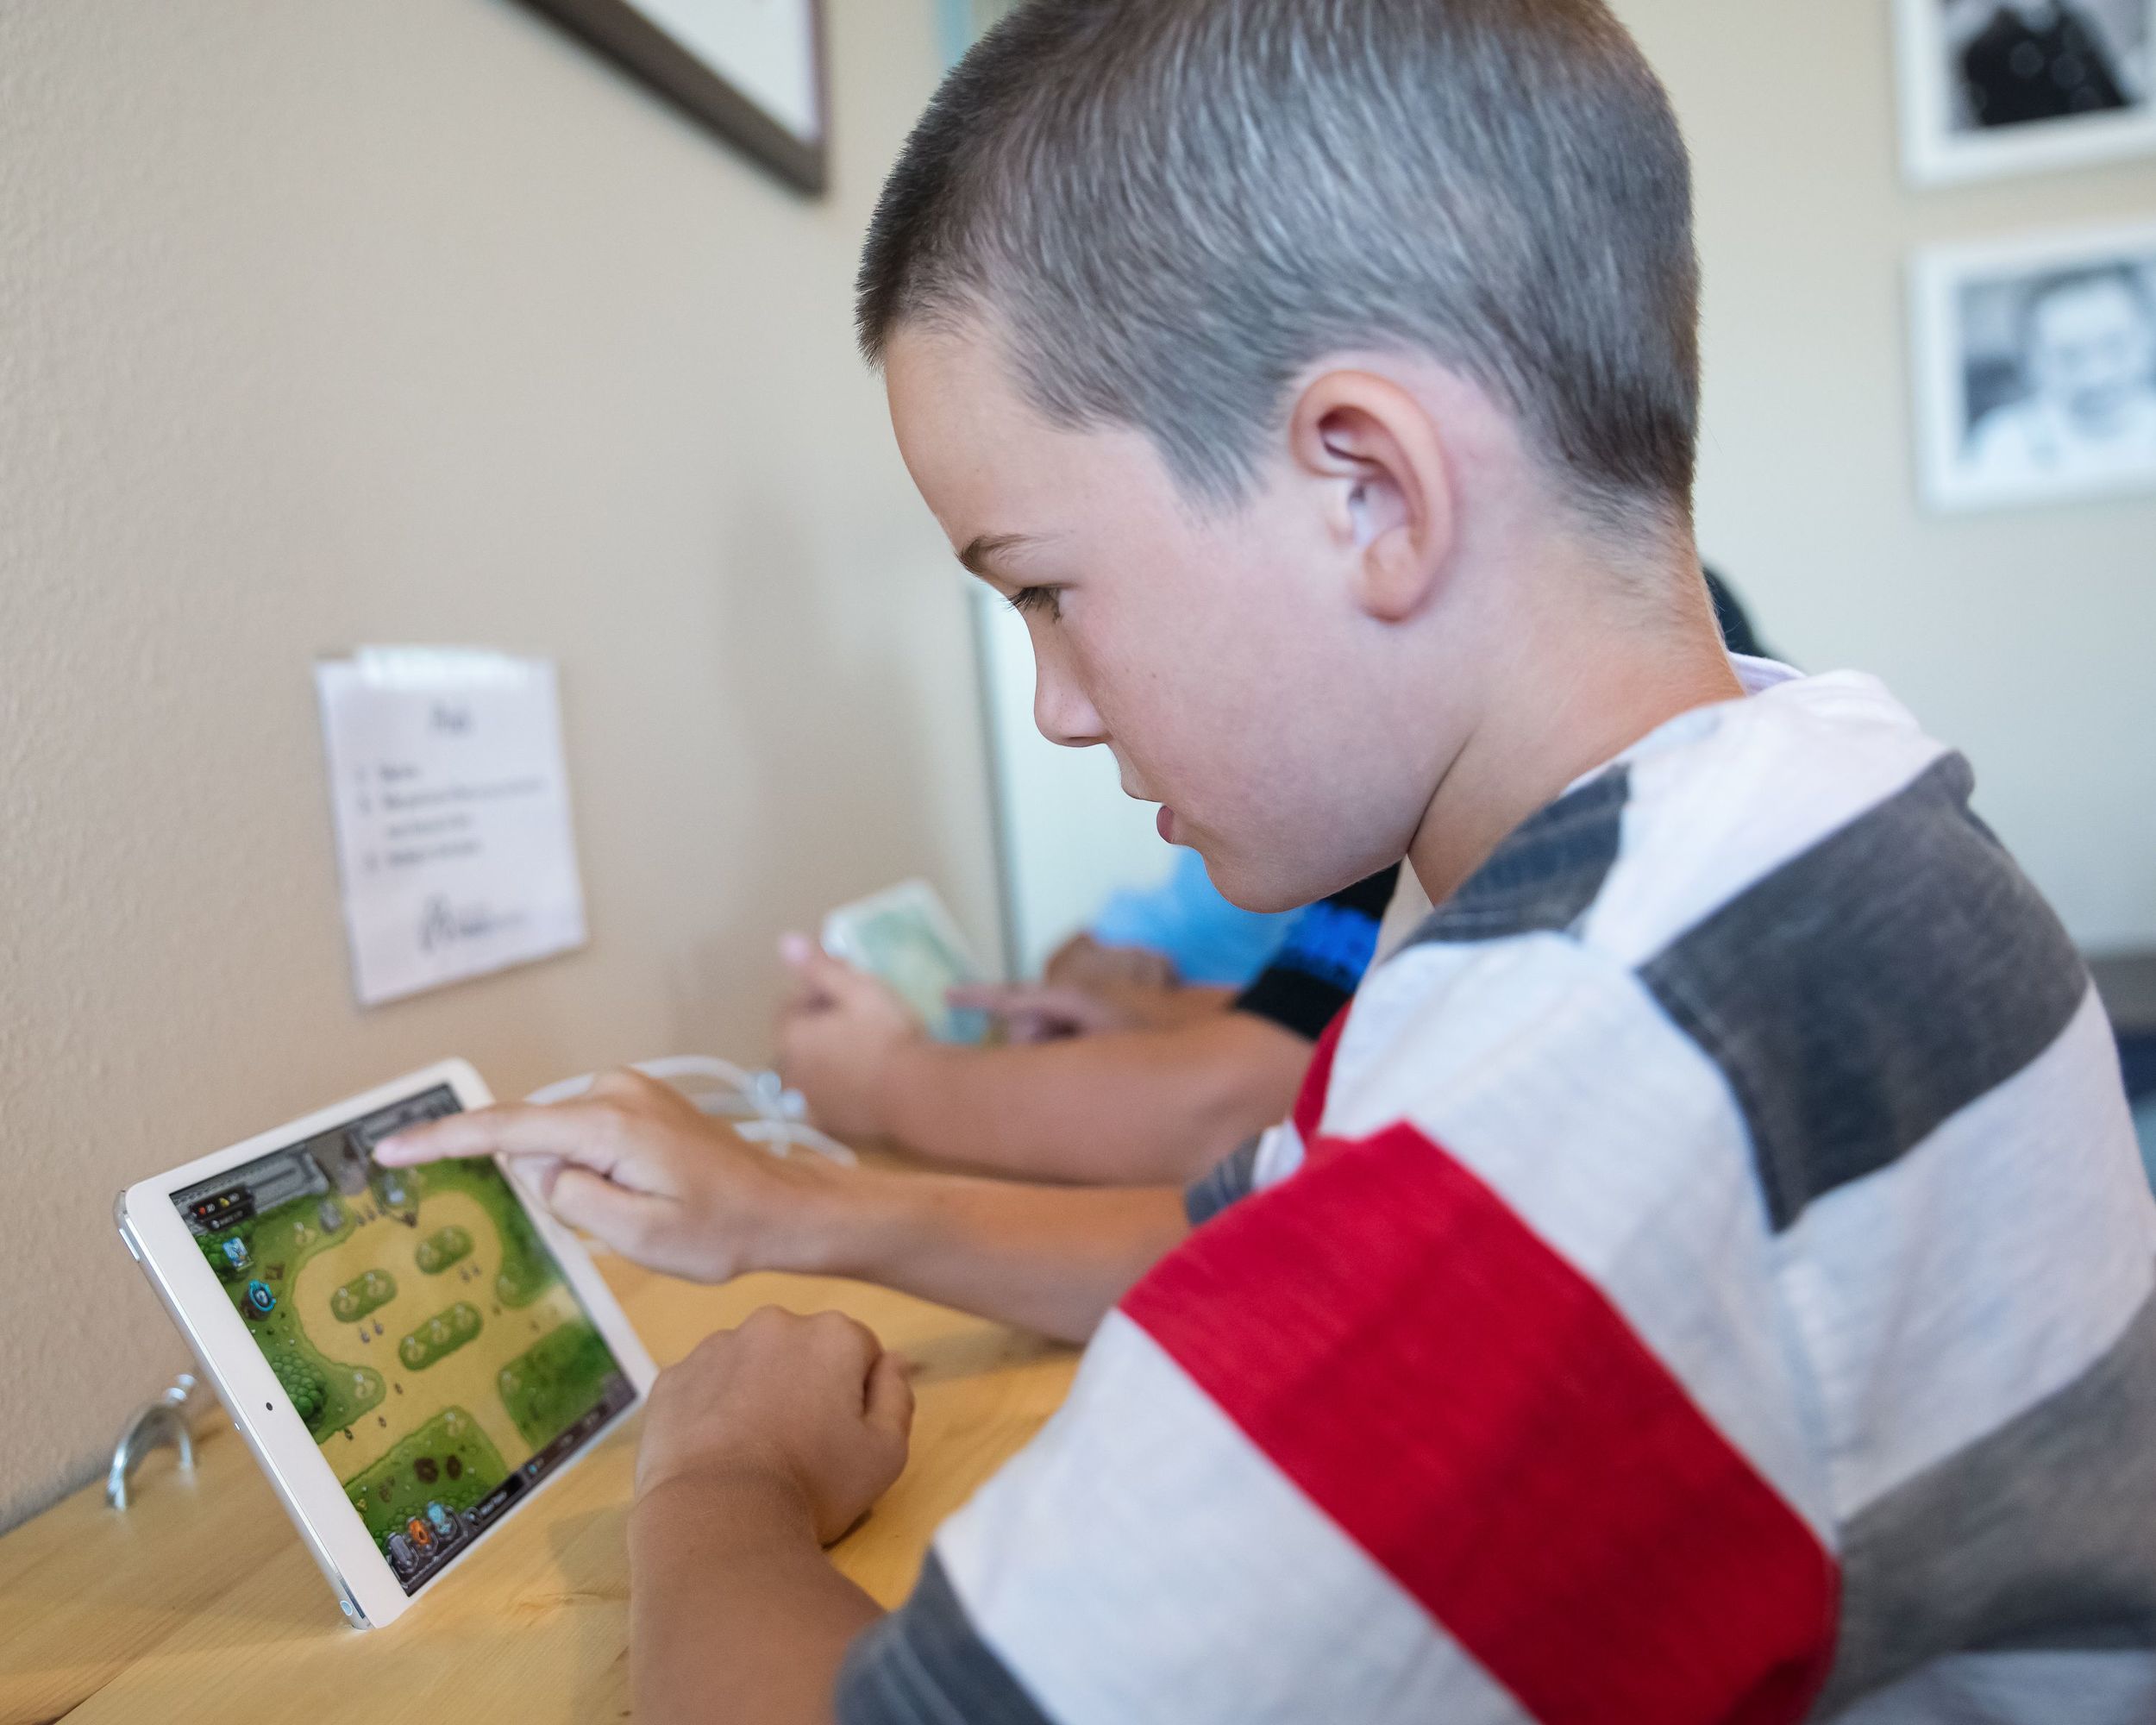 Let your kids (or you) play on an iPad while you wait